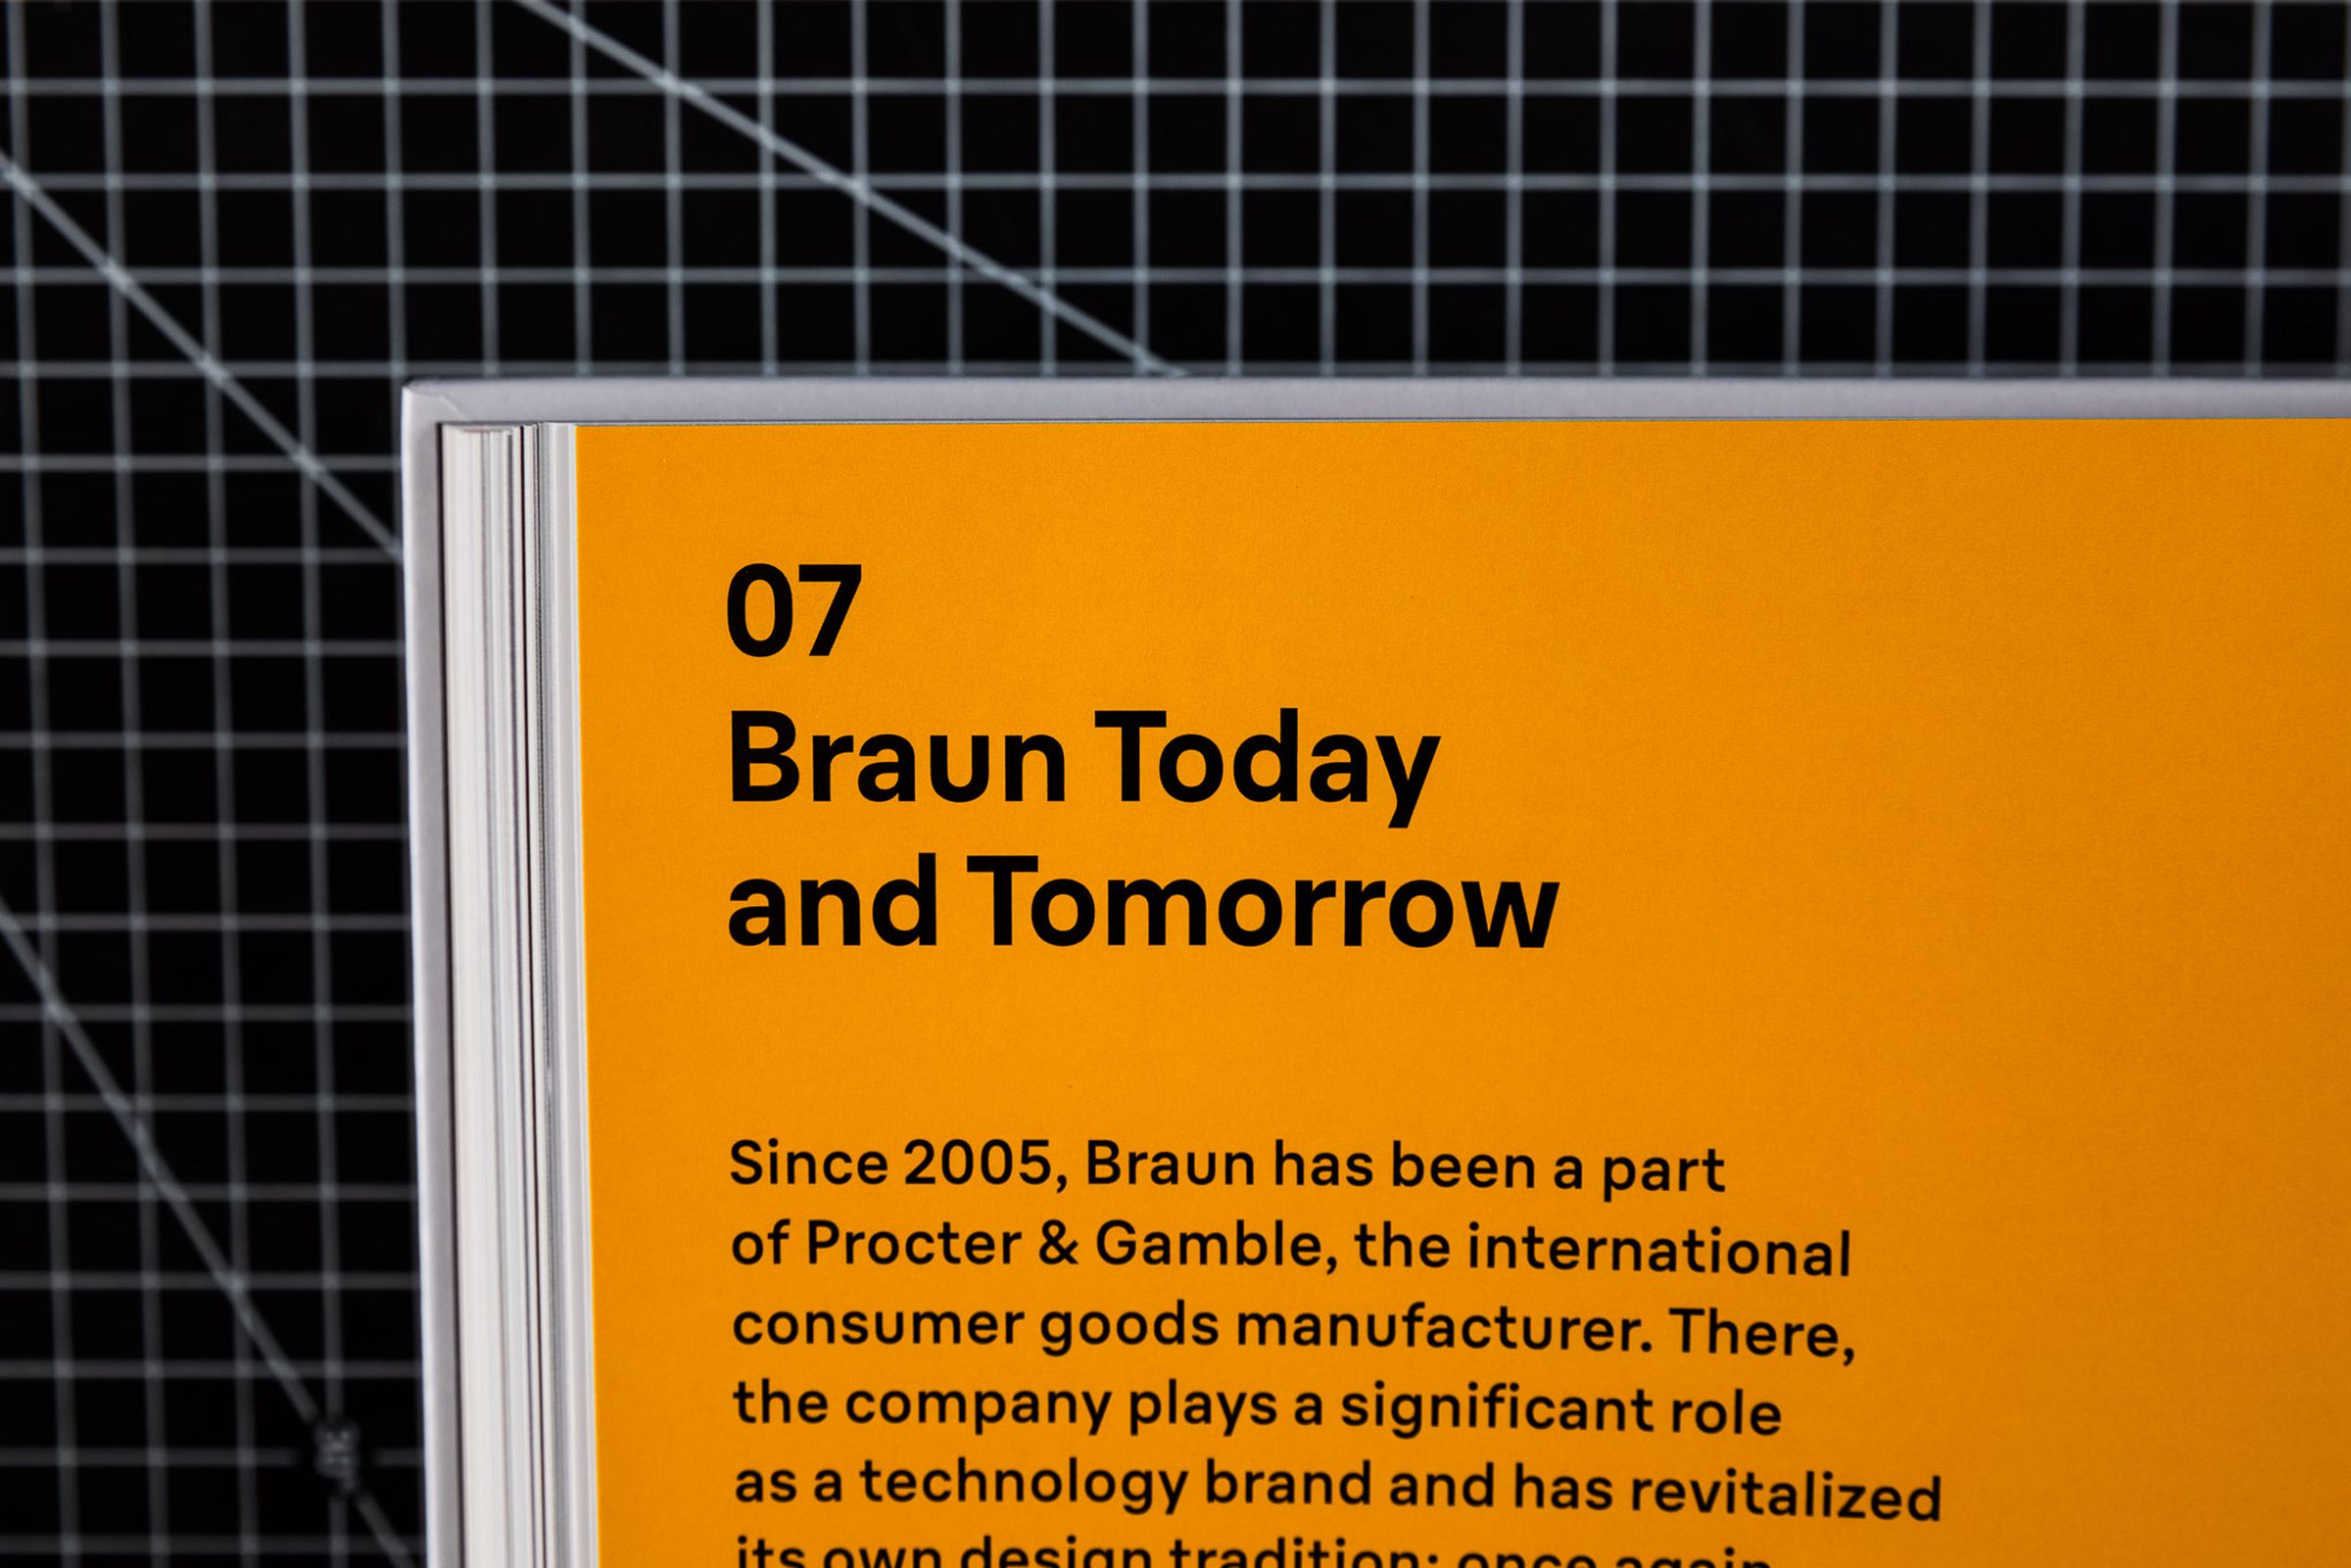 Bold typefaces — Braun Linear, in this case — urge the reader to stop browsing for a moment.